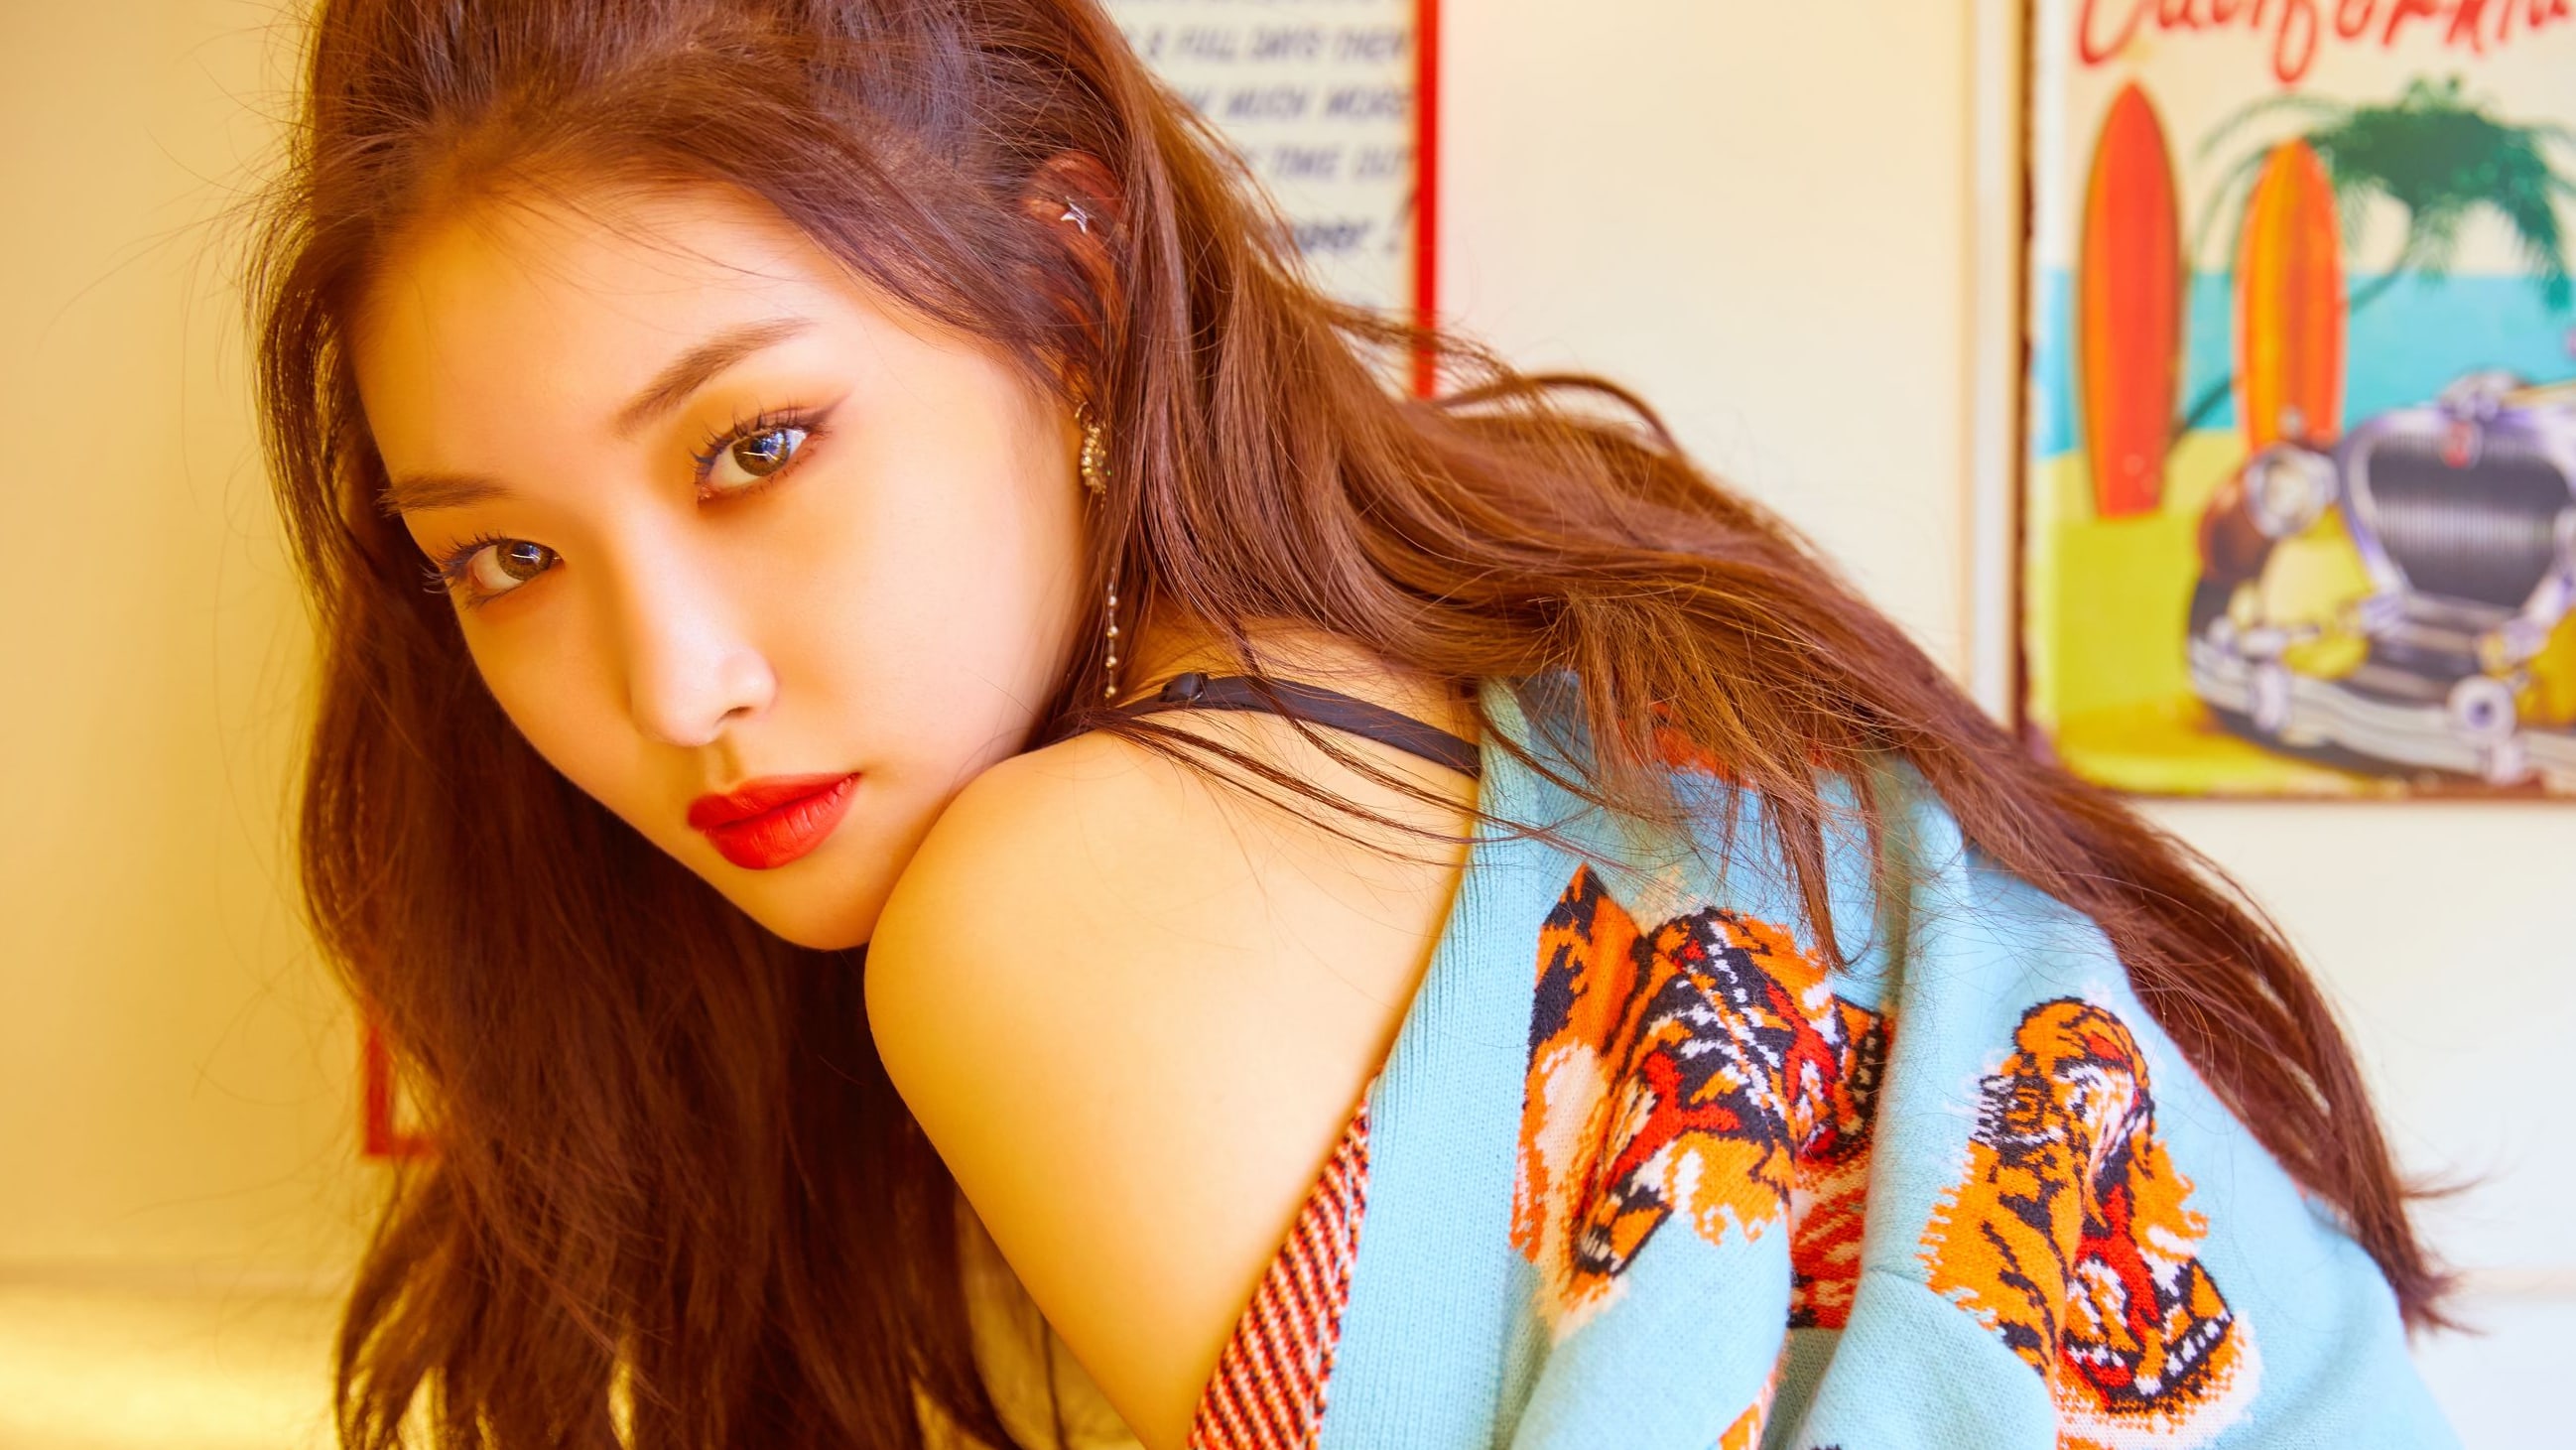 Chungha reveals the comeback schedule for 'Blooming Blue' ⋆ The latest kpop news and music | Officially Kmusic